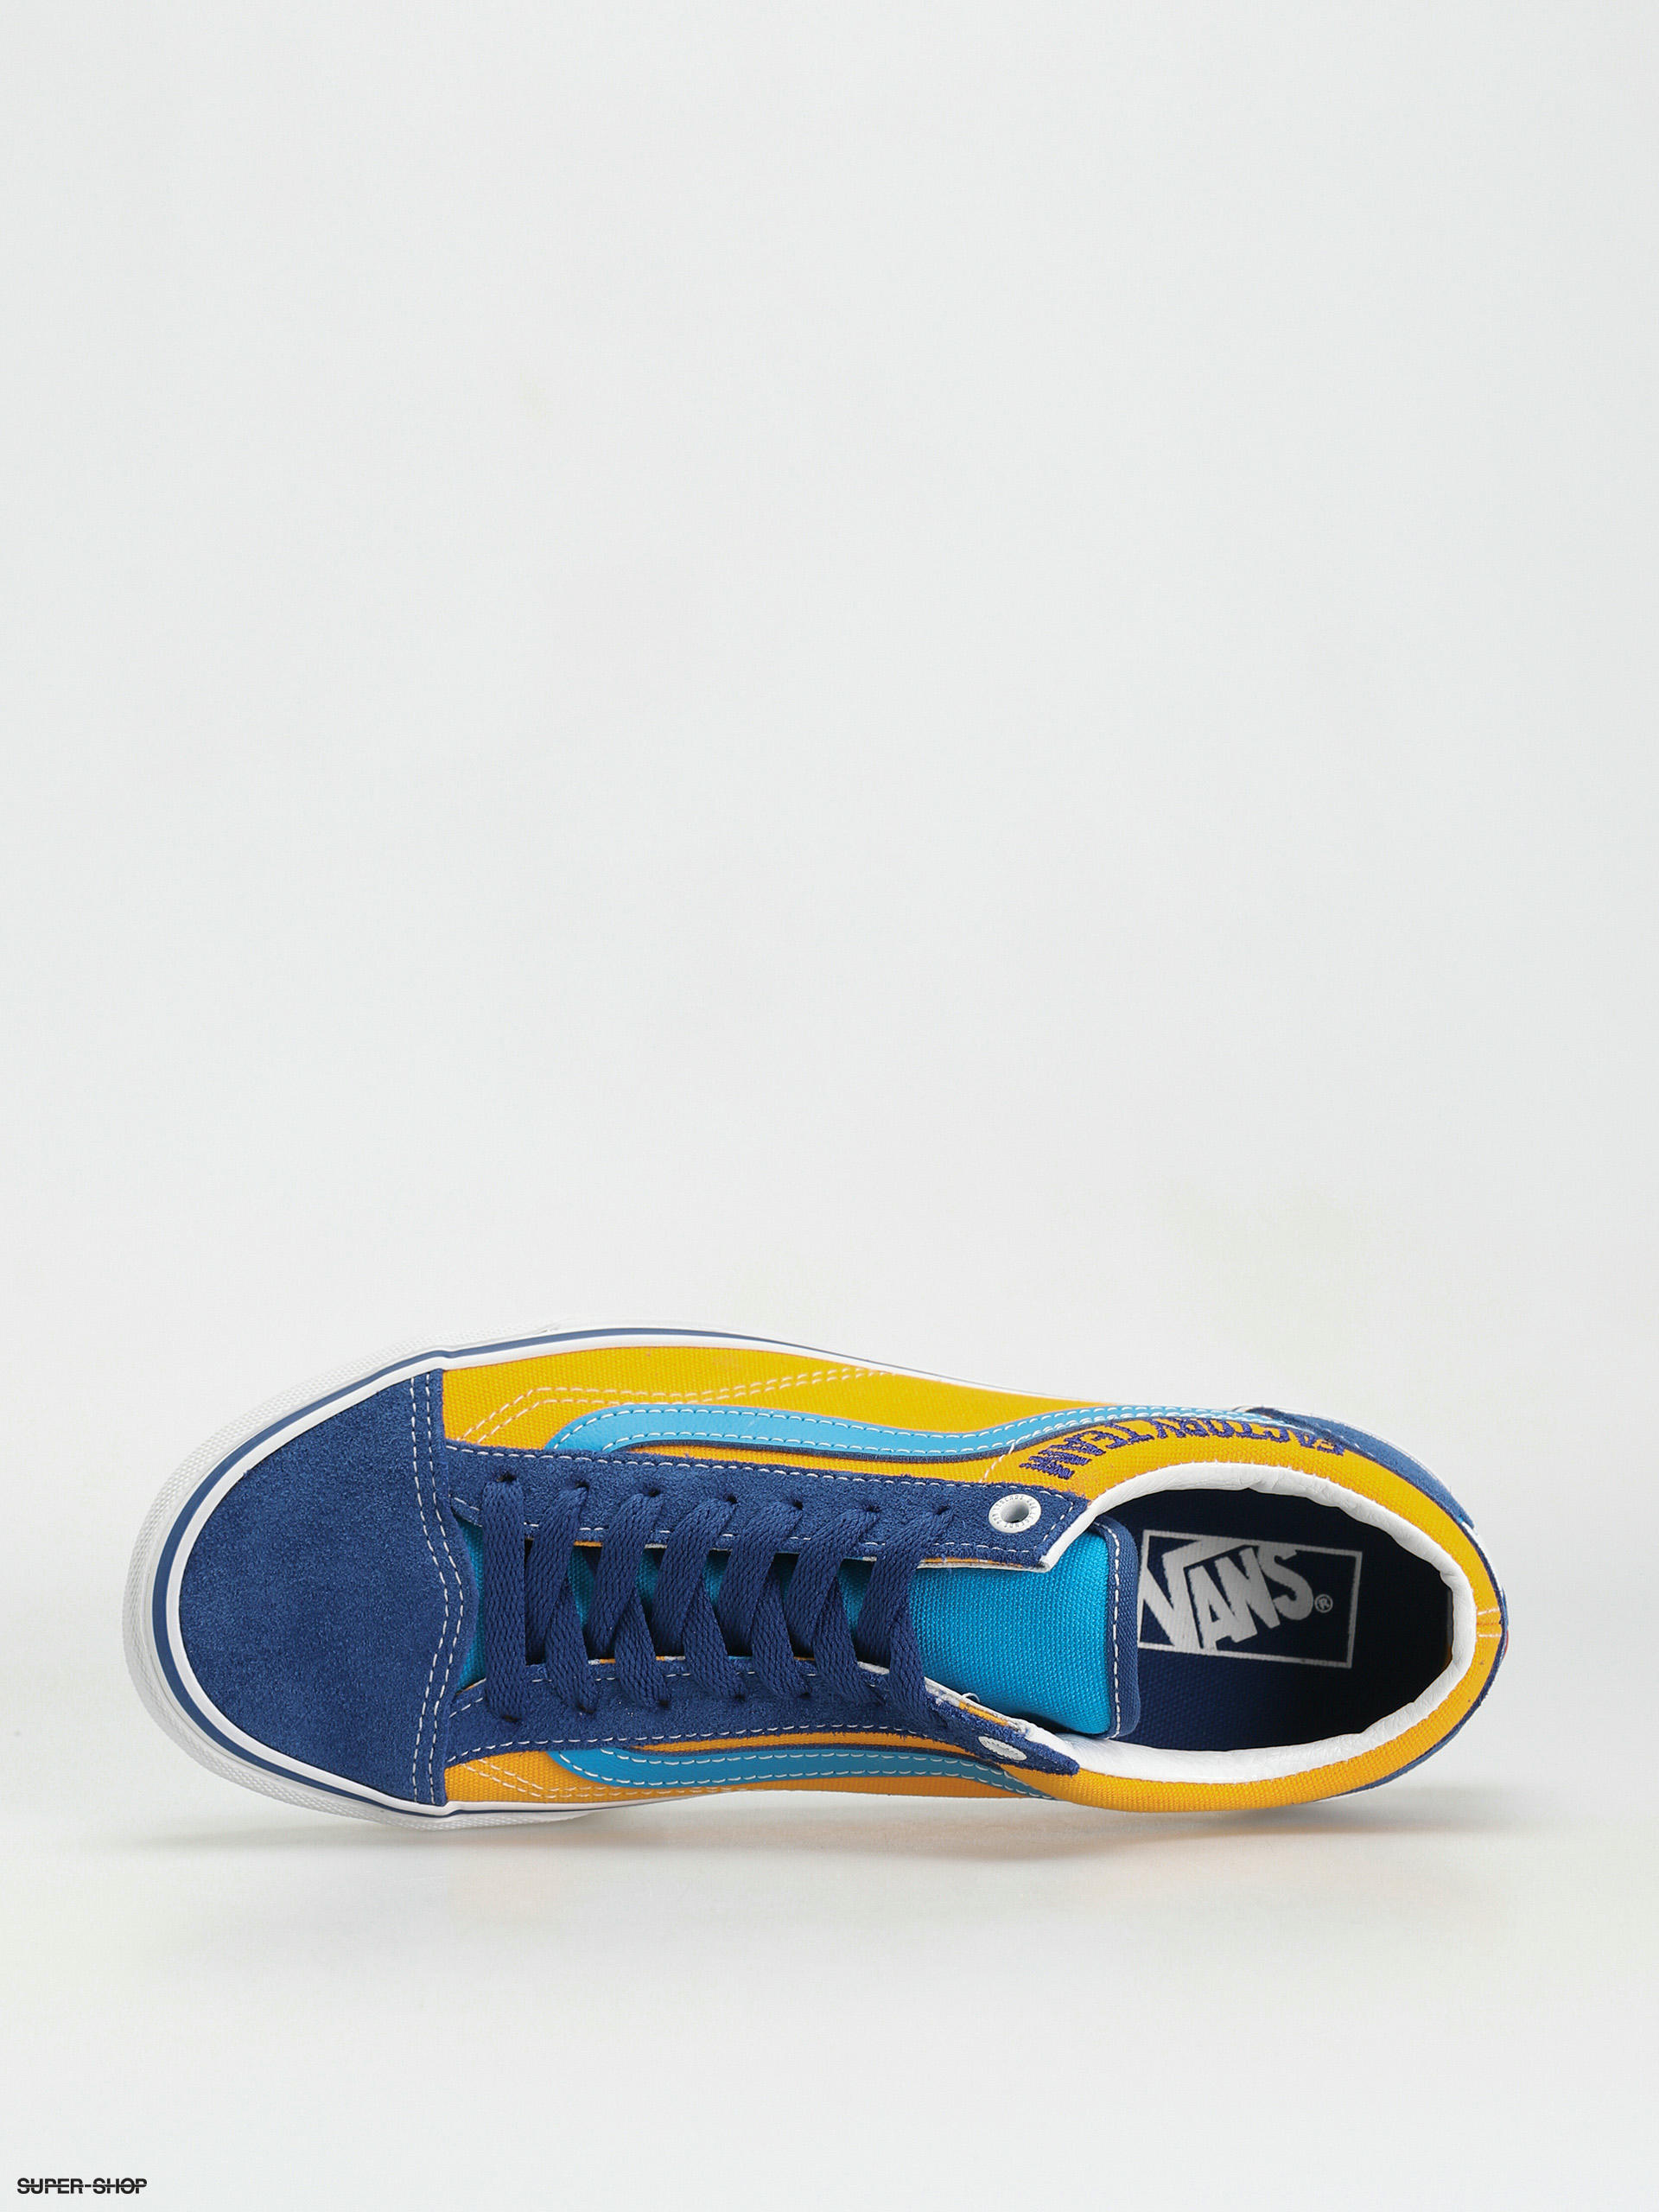 New Vans X Our Legends Era White/Blue Sneakers Limited-Edition